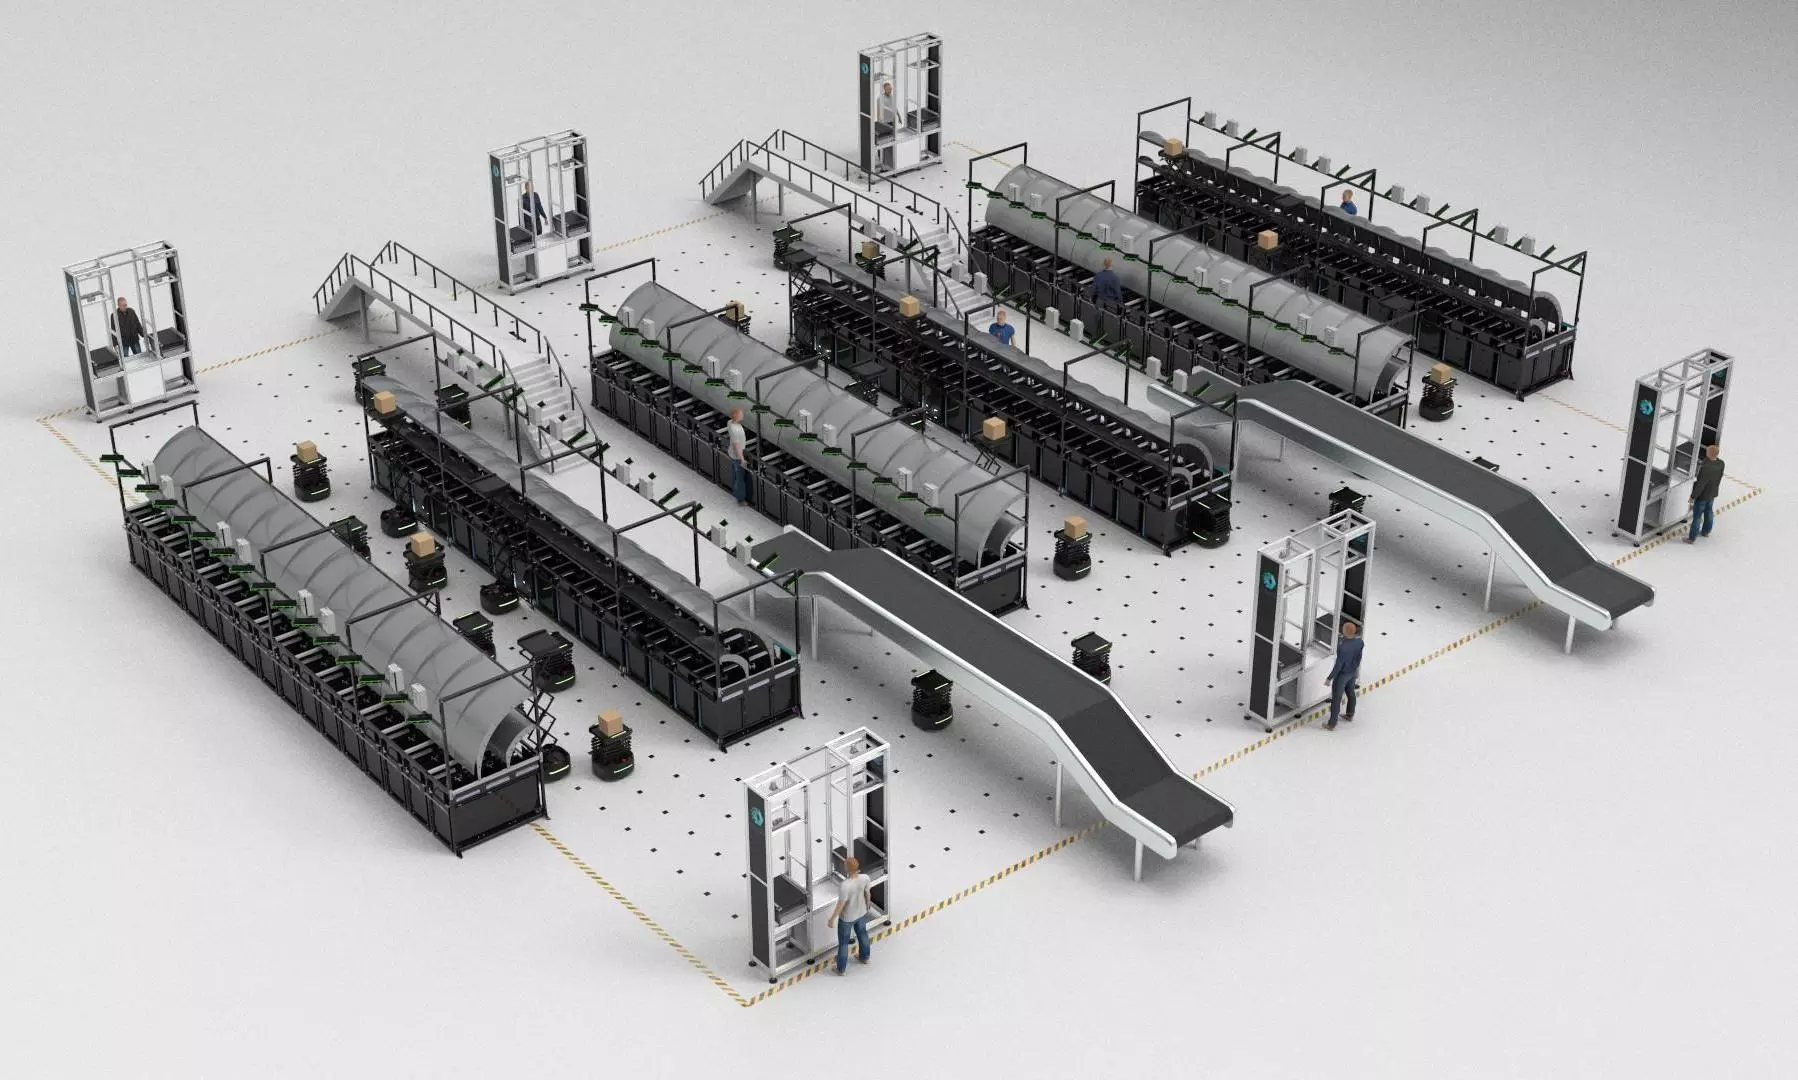 How warehouses can achieve higher productivity, revenues, accuracy, scalability with robotics